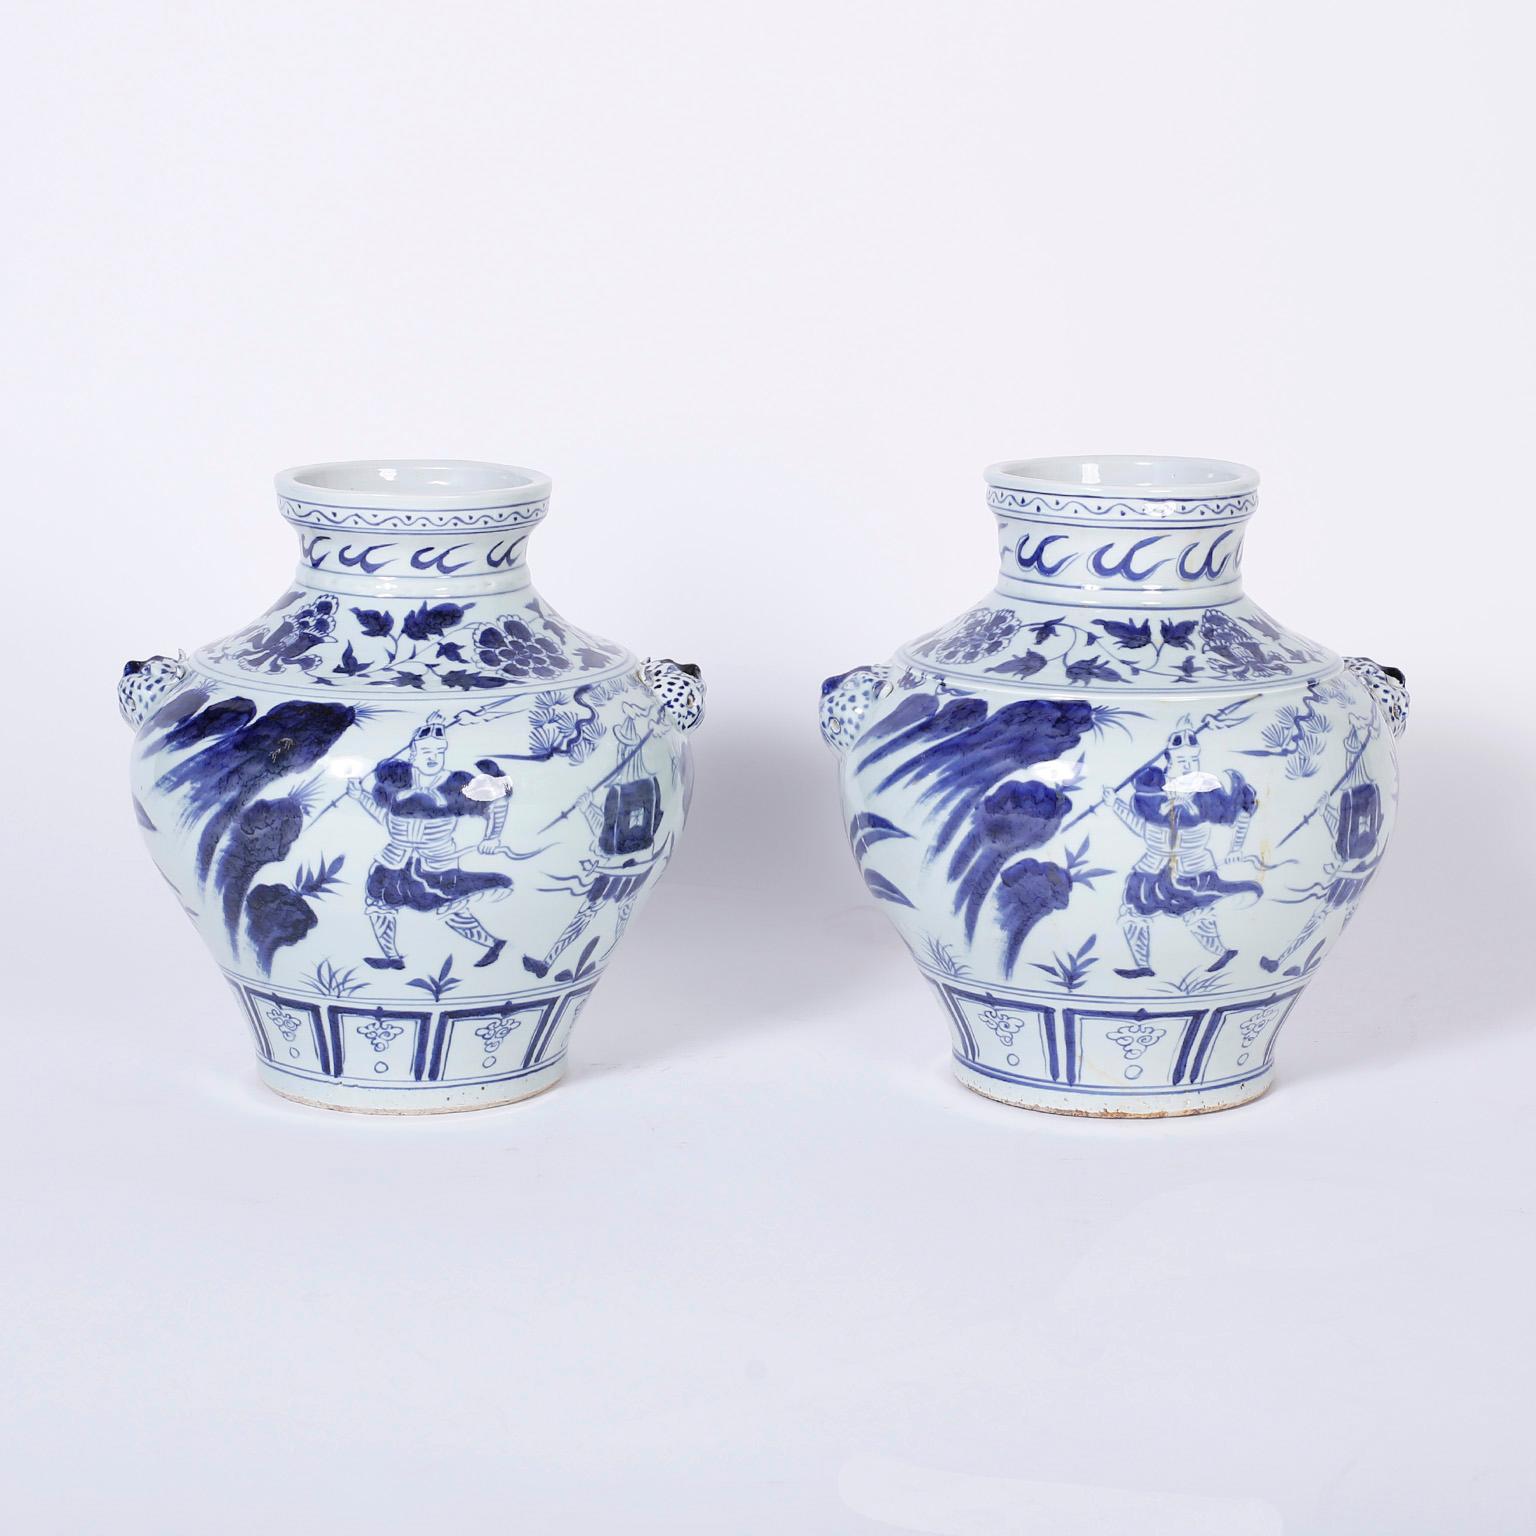 Intriguing pair of Chinese export style blue and white urns decorated with figures and flowers and having the unusual leopard head handles.